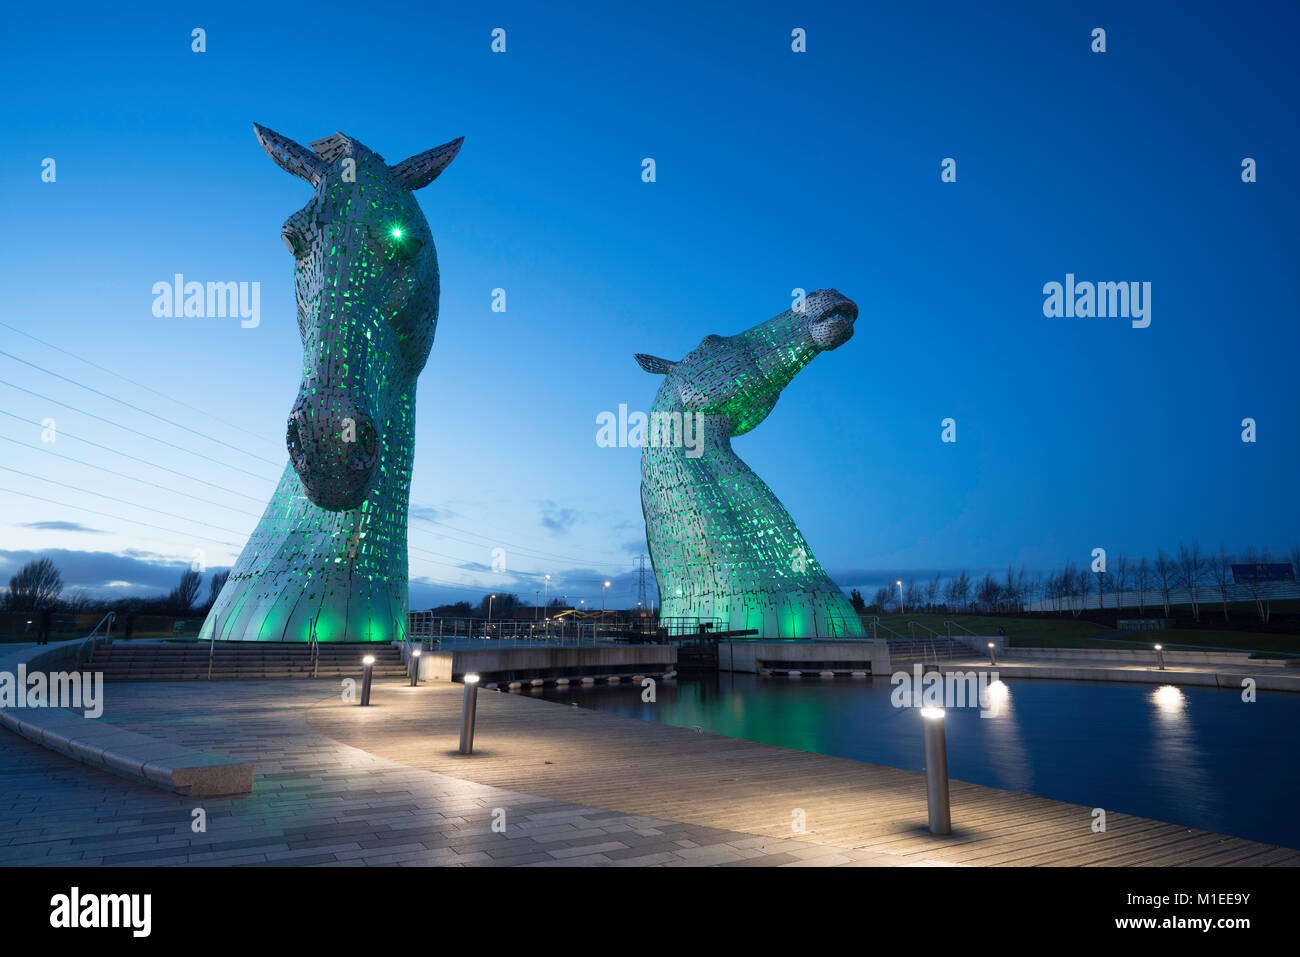 Night view of The Kelpies , large sculptures of horses, at Helix Park in Falkirk, Scotland, united Kingdom Stock Photo